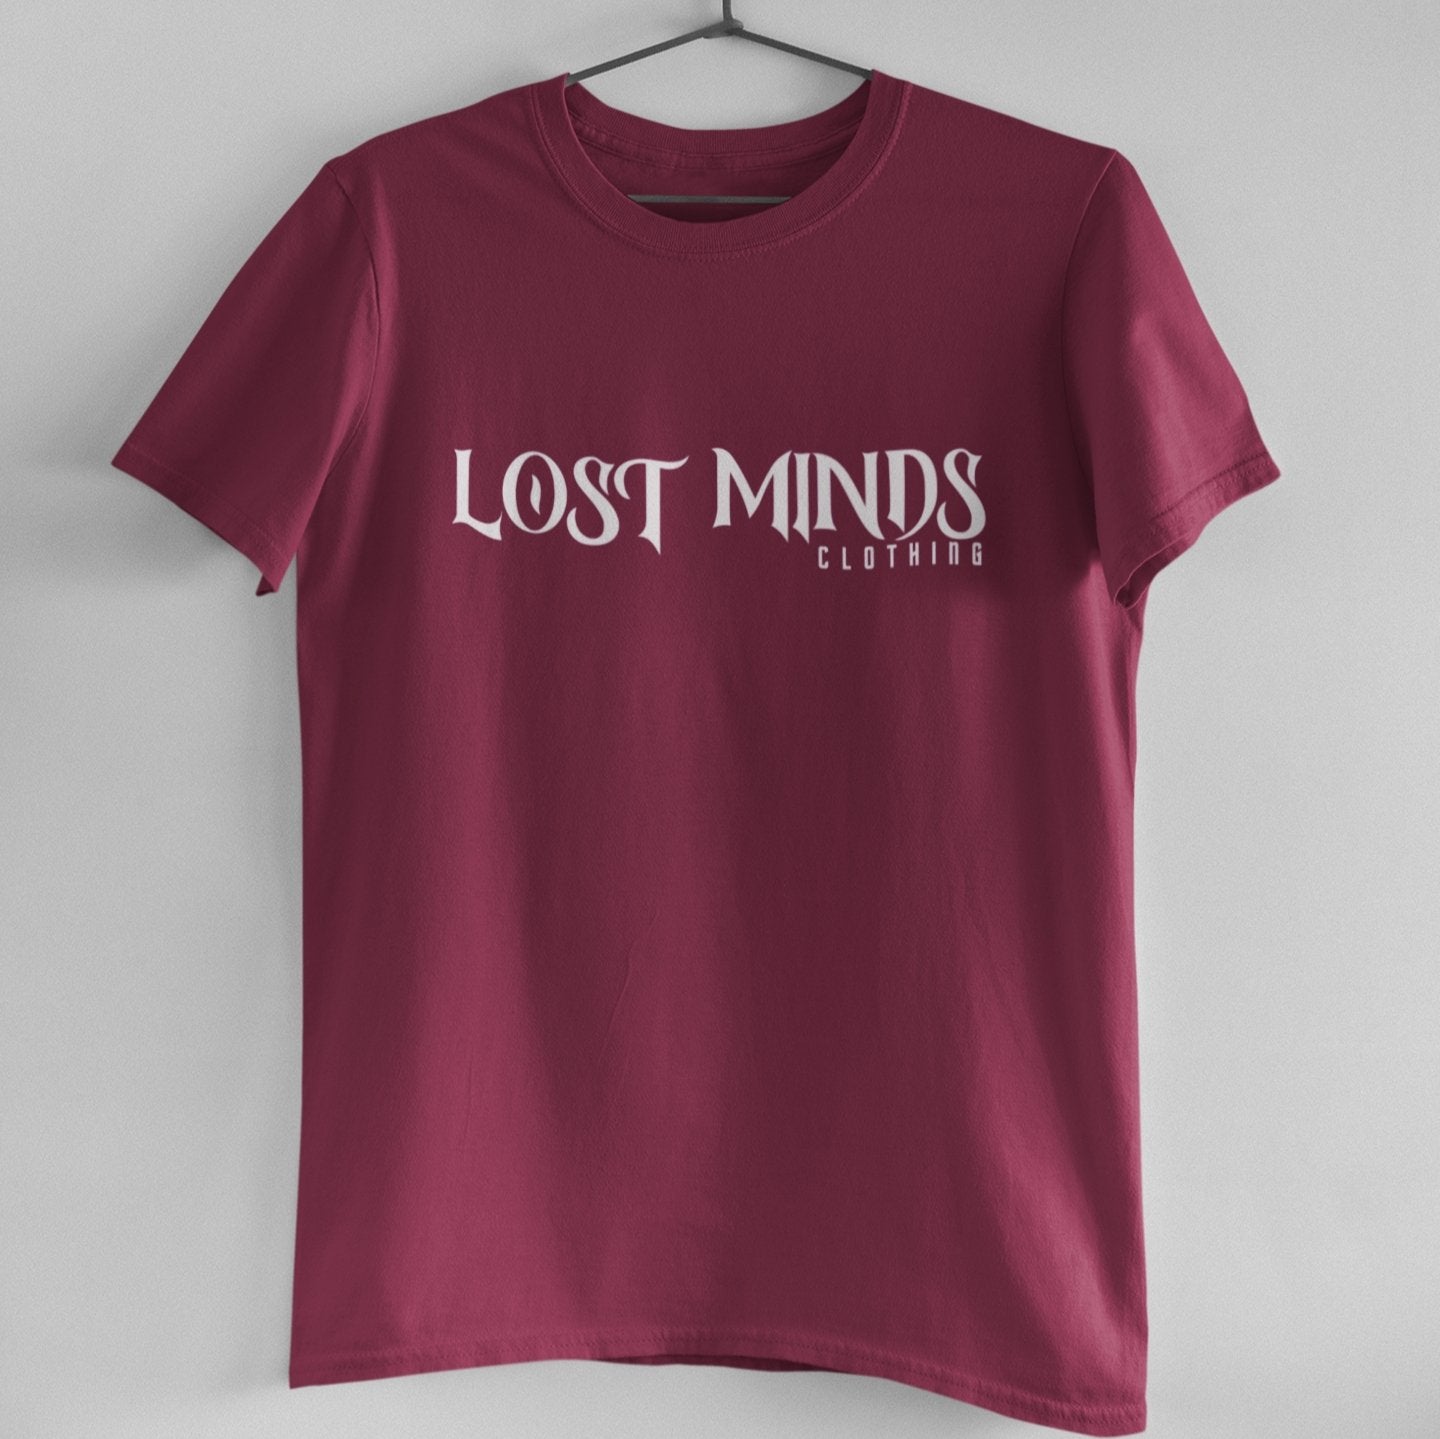 Lost Minds Unisex Tee - Burgundy - Lost Minds Clothing